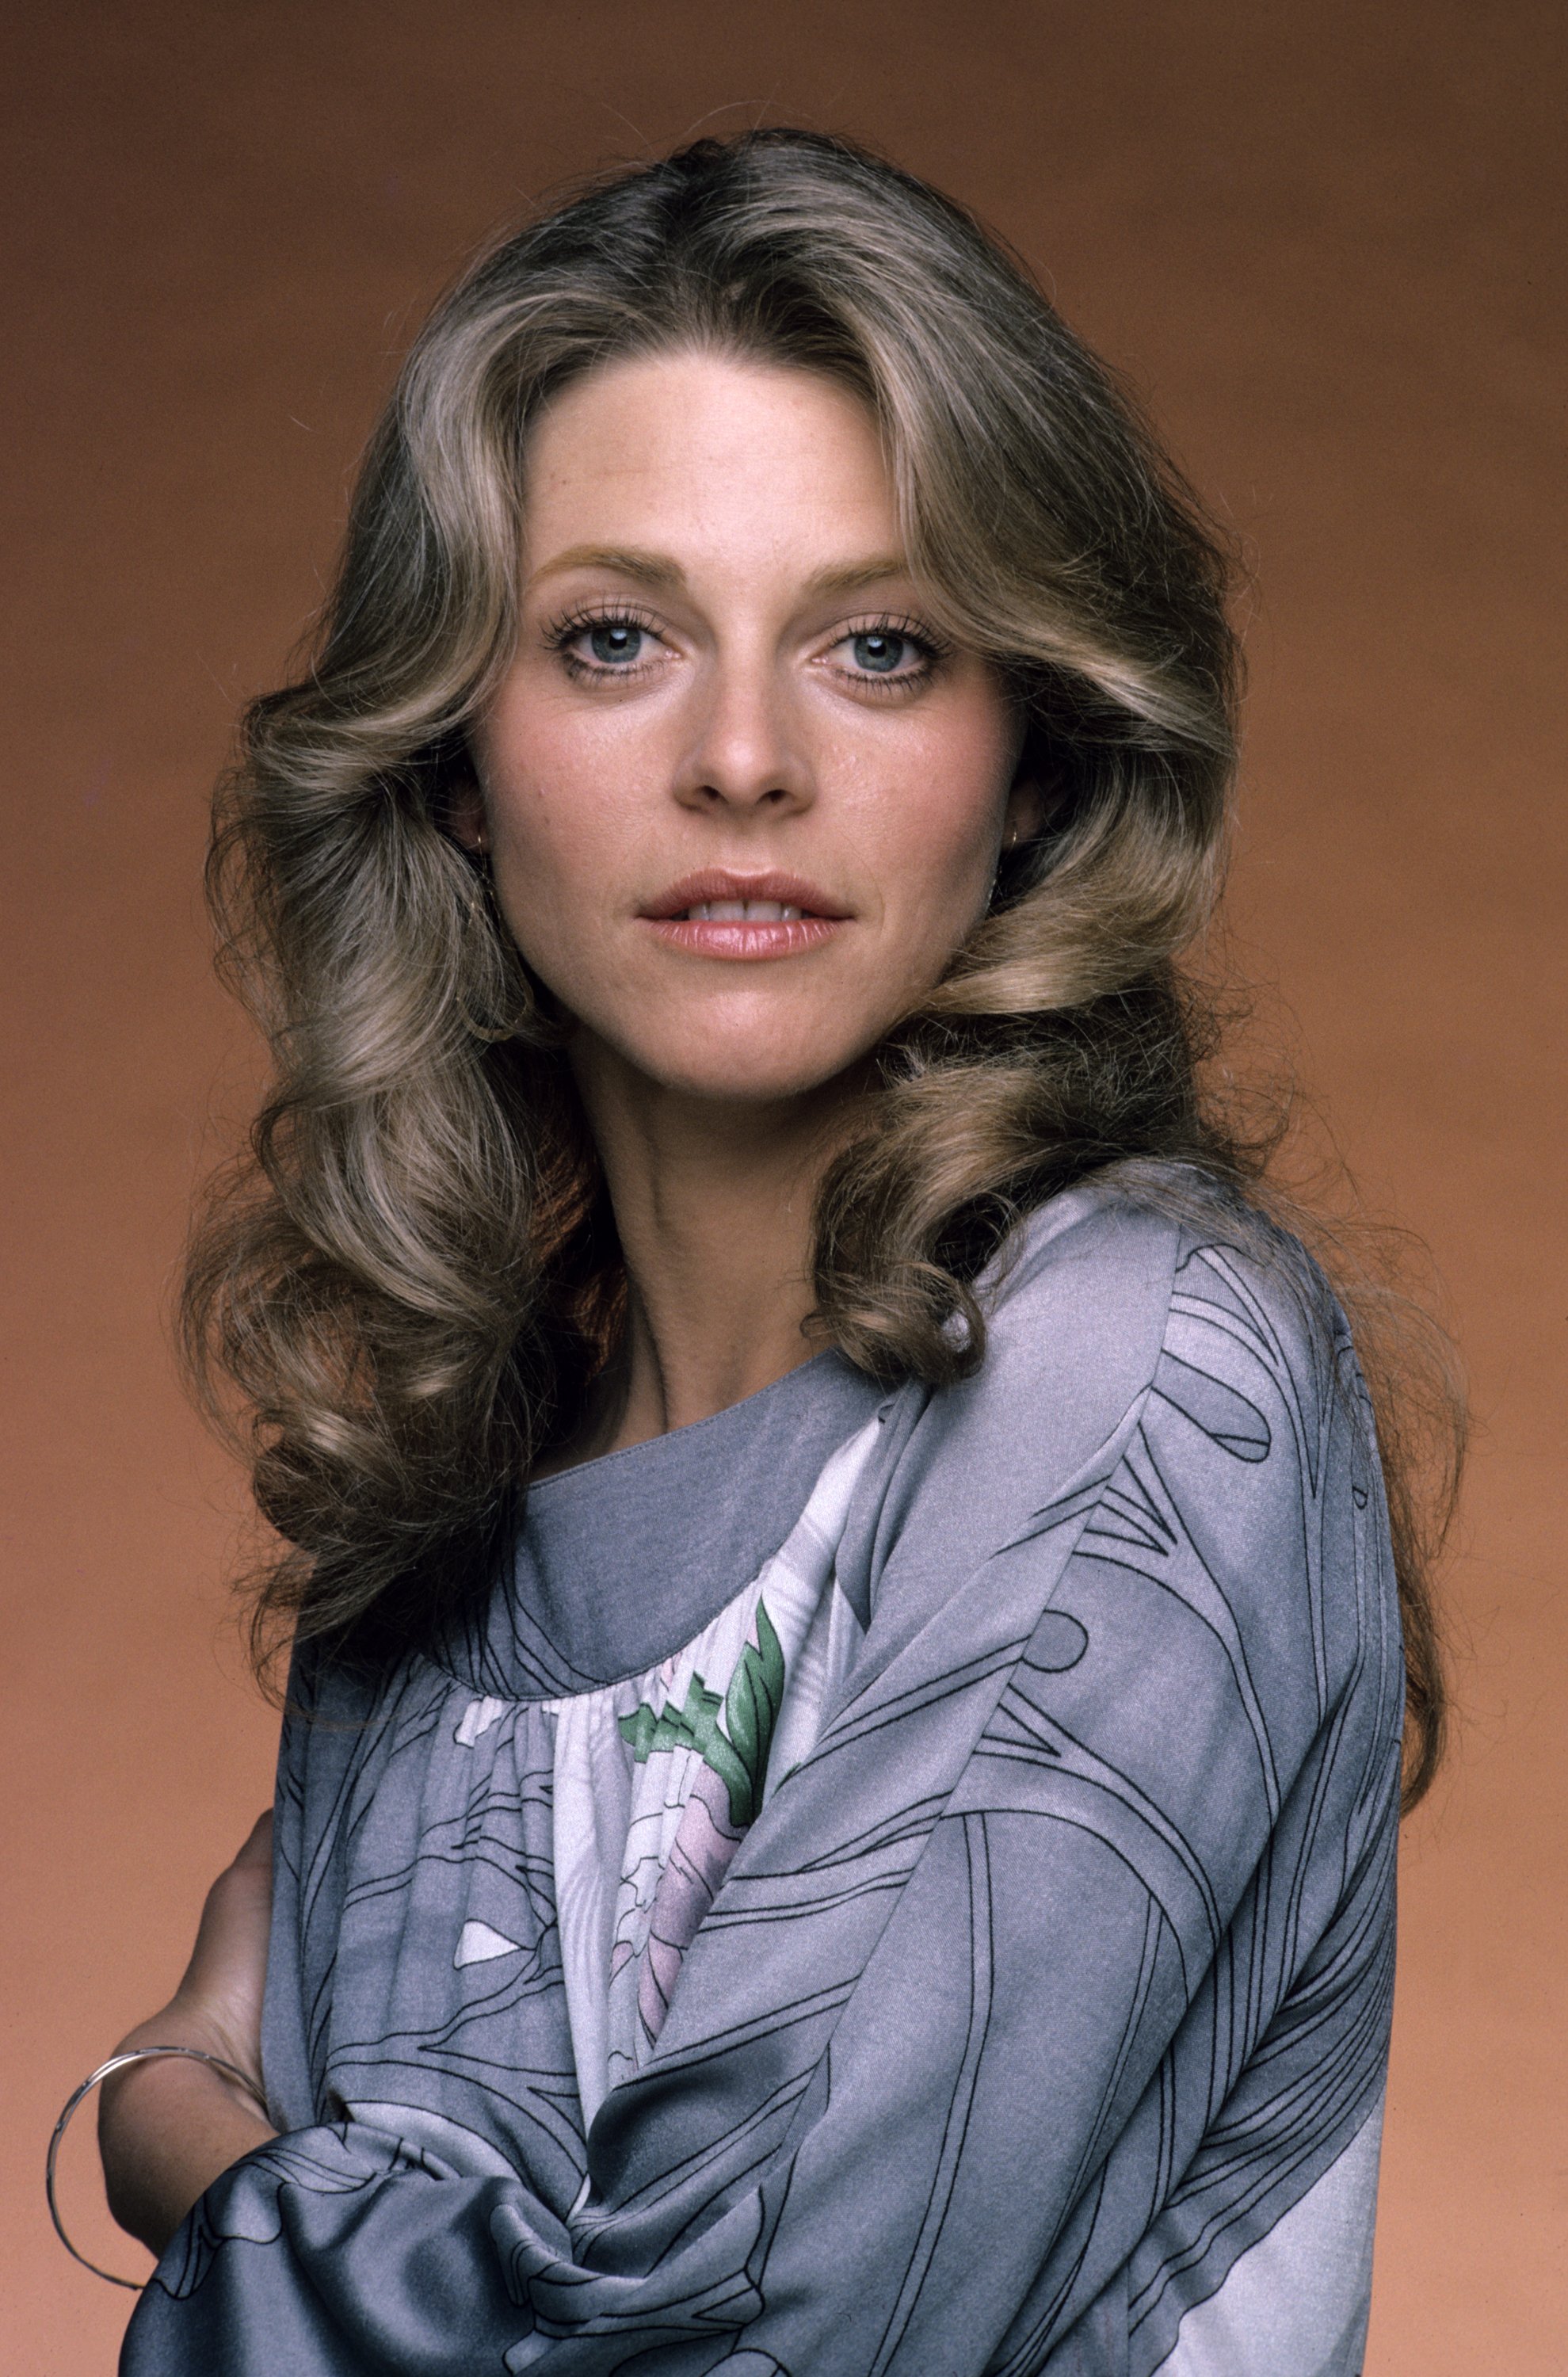 Lindsay Wagner as Jaime Sommers, on "The Bionic Woman" | Source: Getty Images